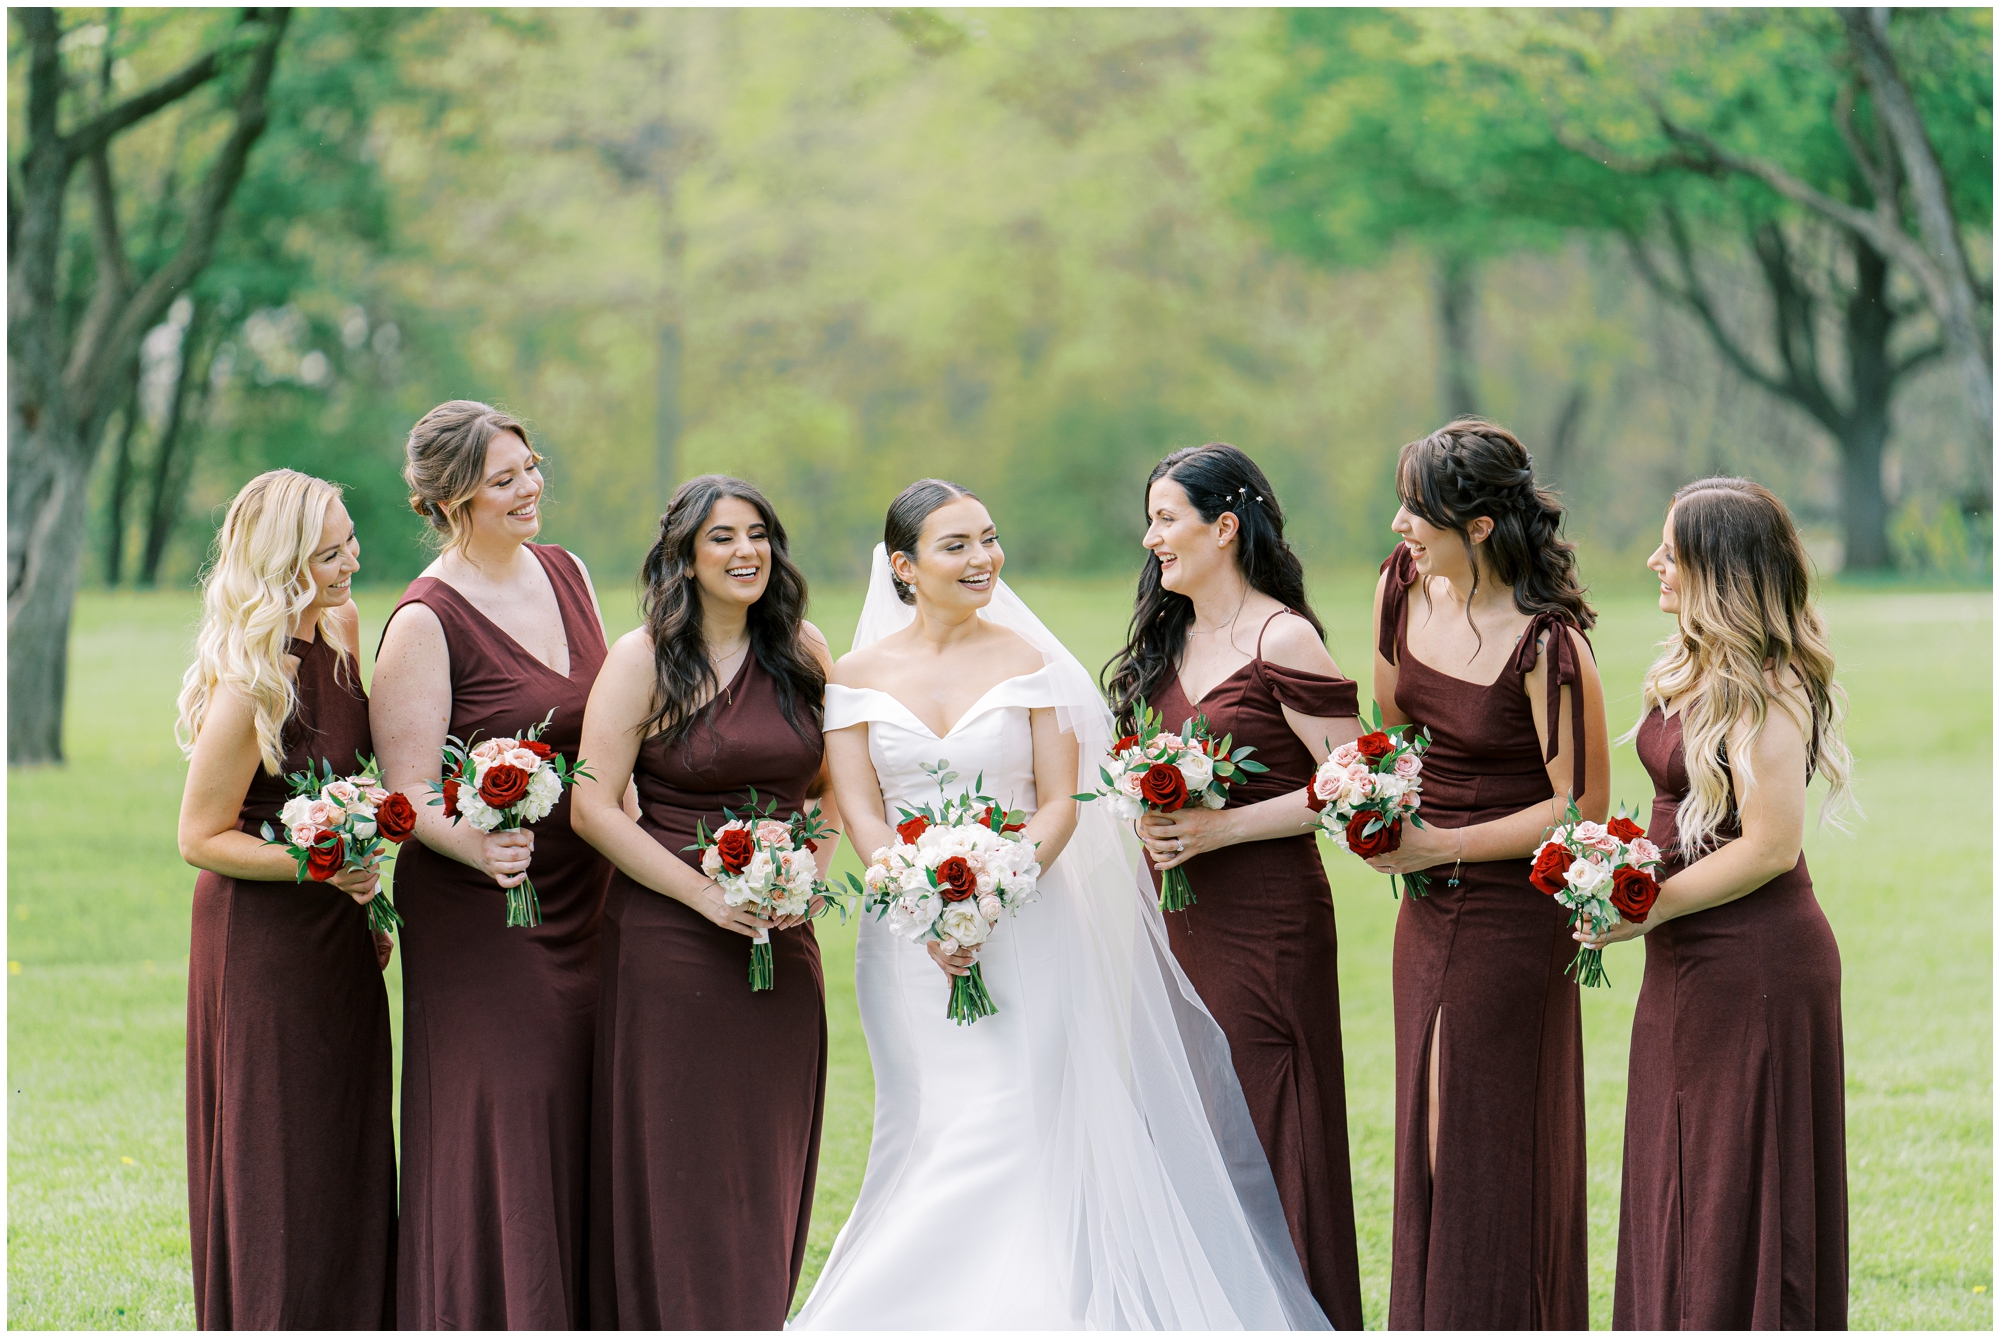 Bridesmaids with burgundy dresses